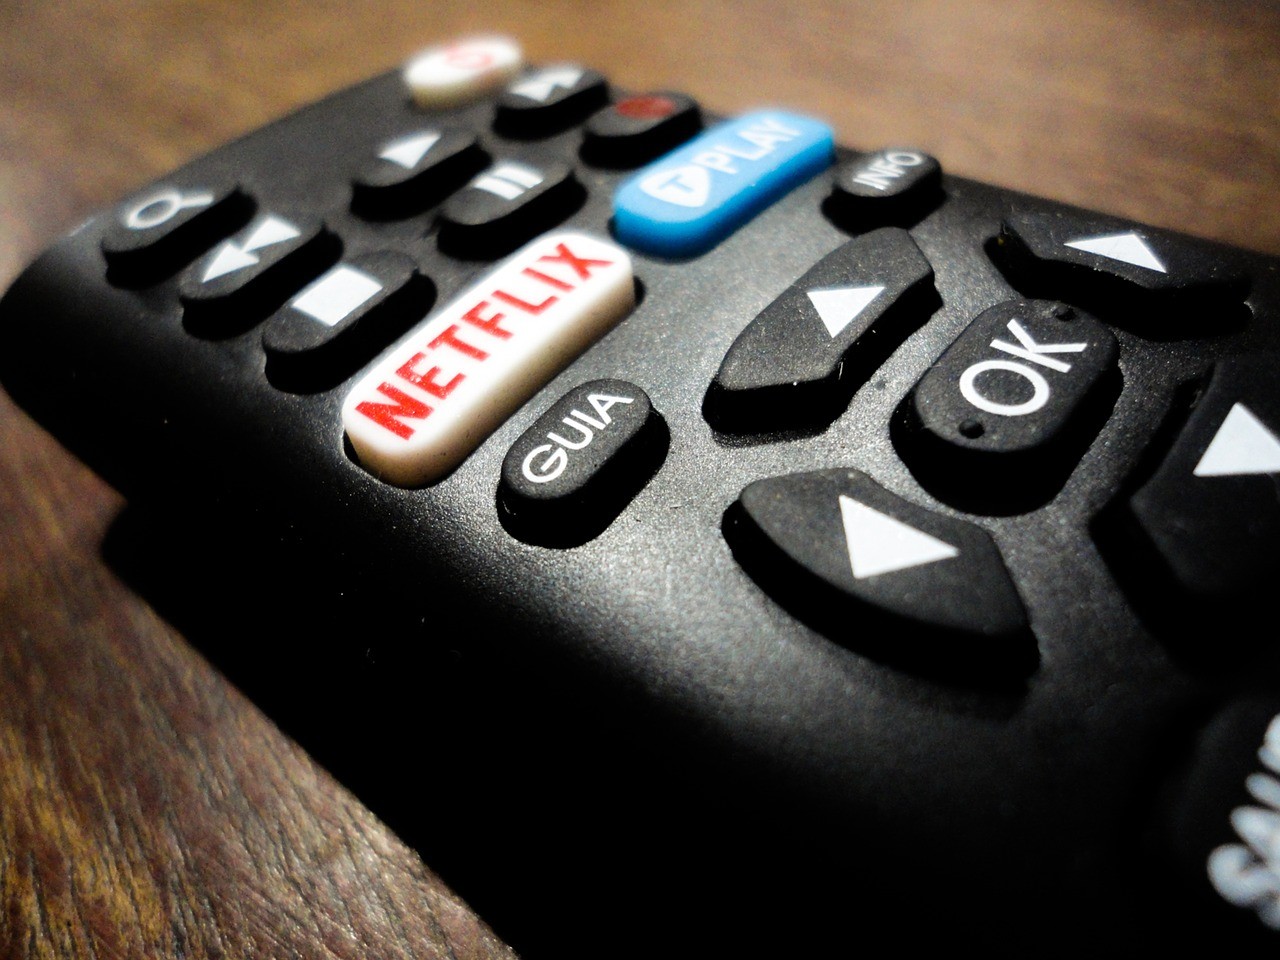 Stay on Top of Your Binge-Watching with Smart Management Tools